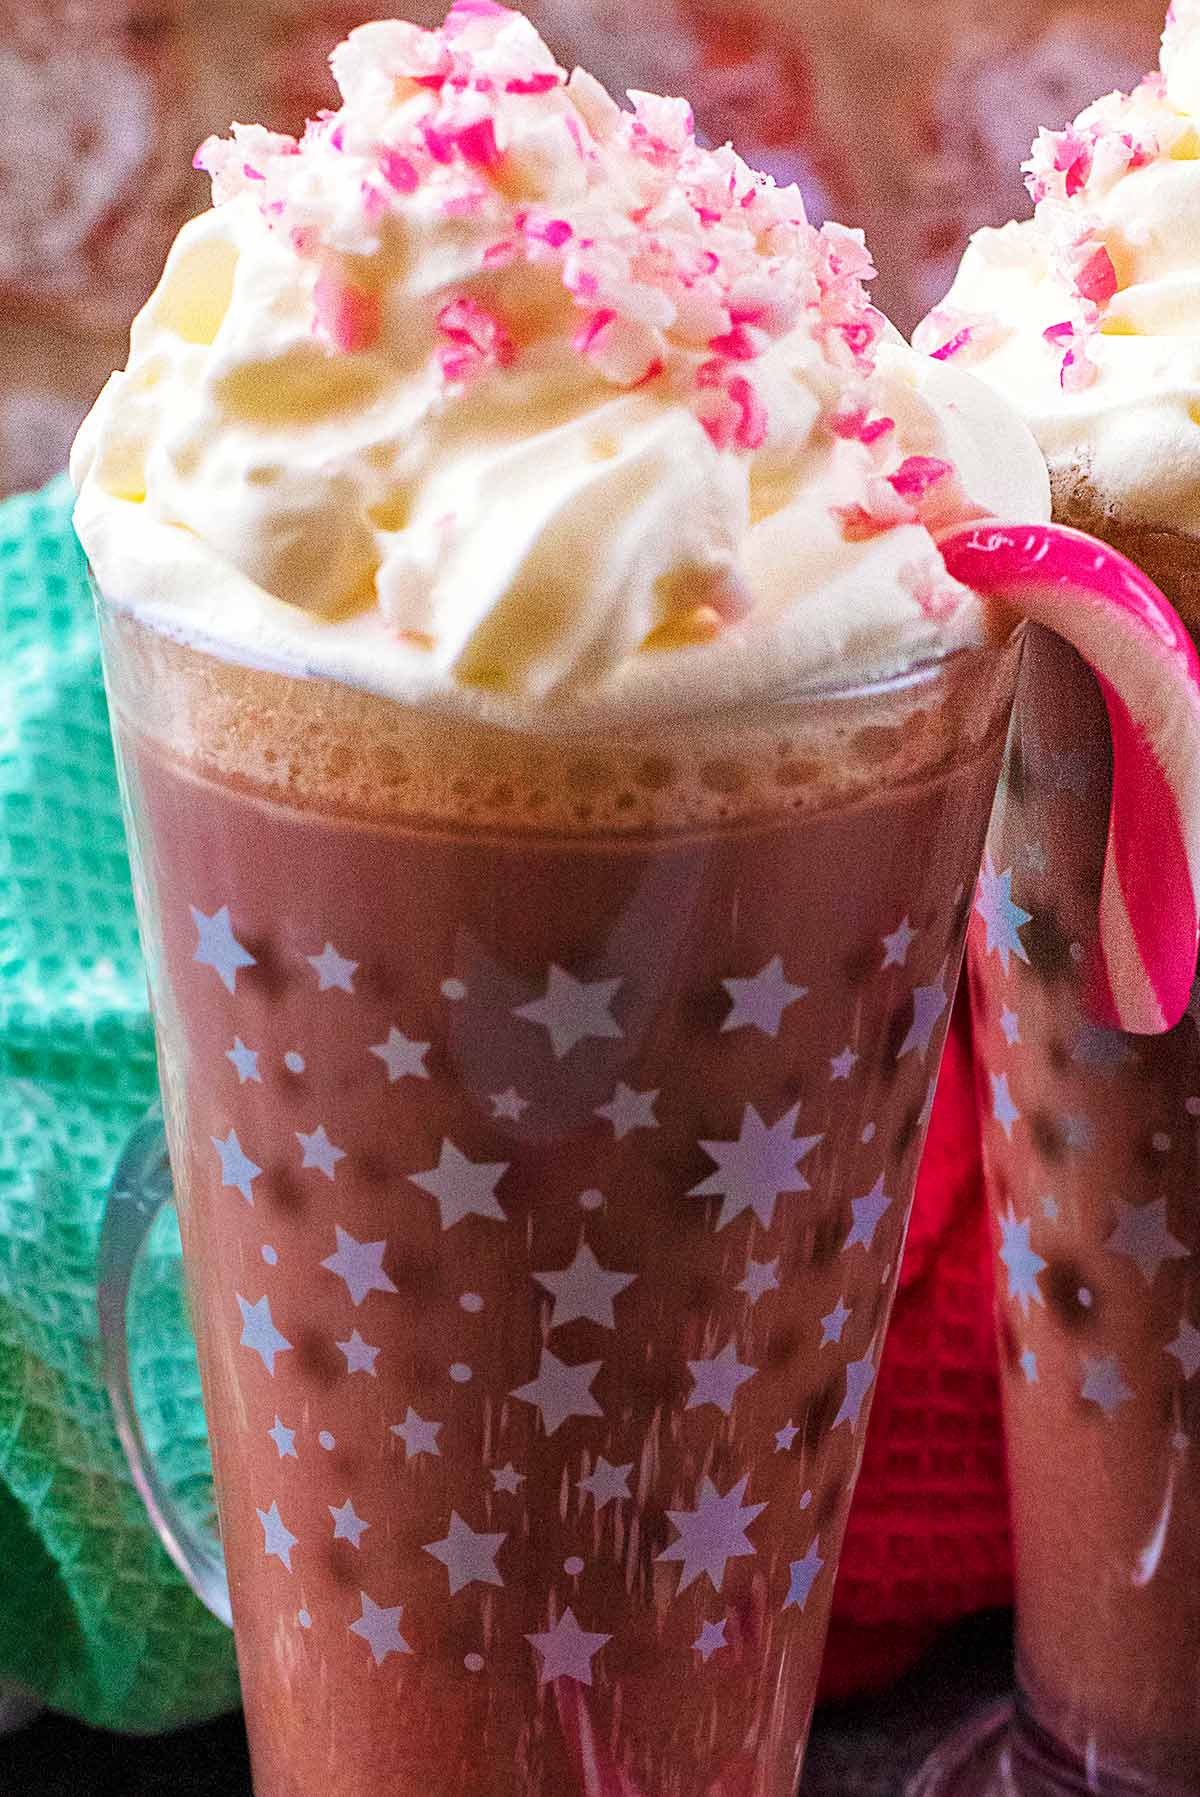 Crushed candy canes sprinkled over whipped cream on top of a glass of hot chocolate.